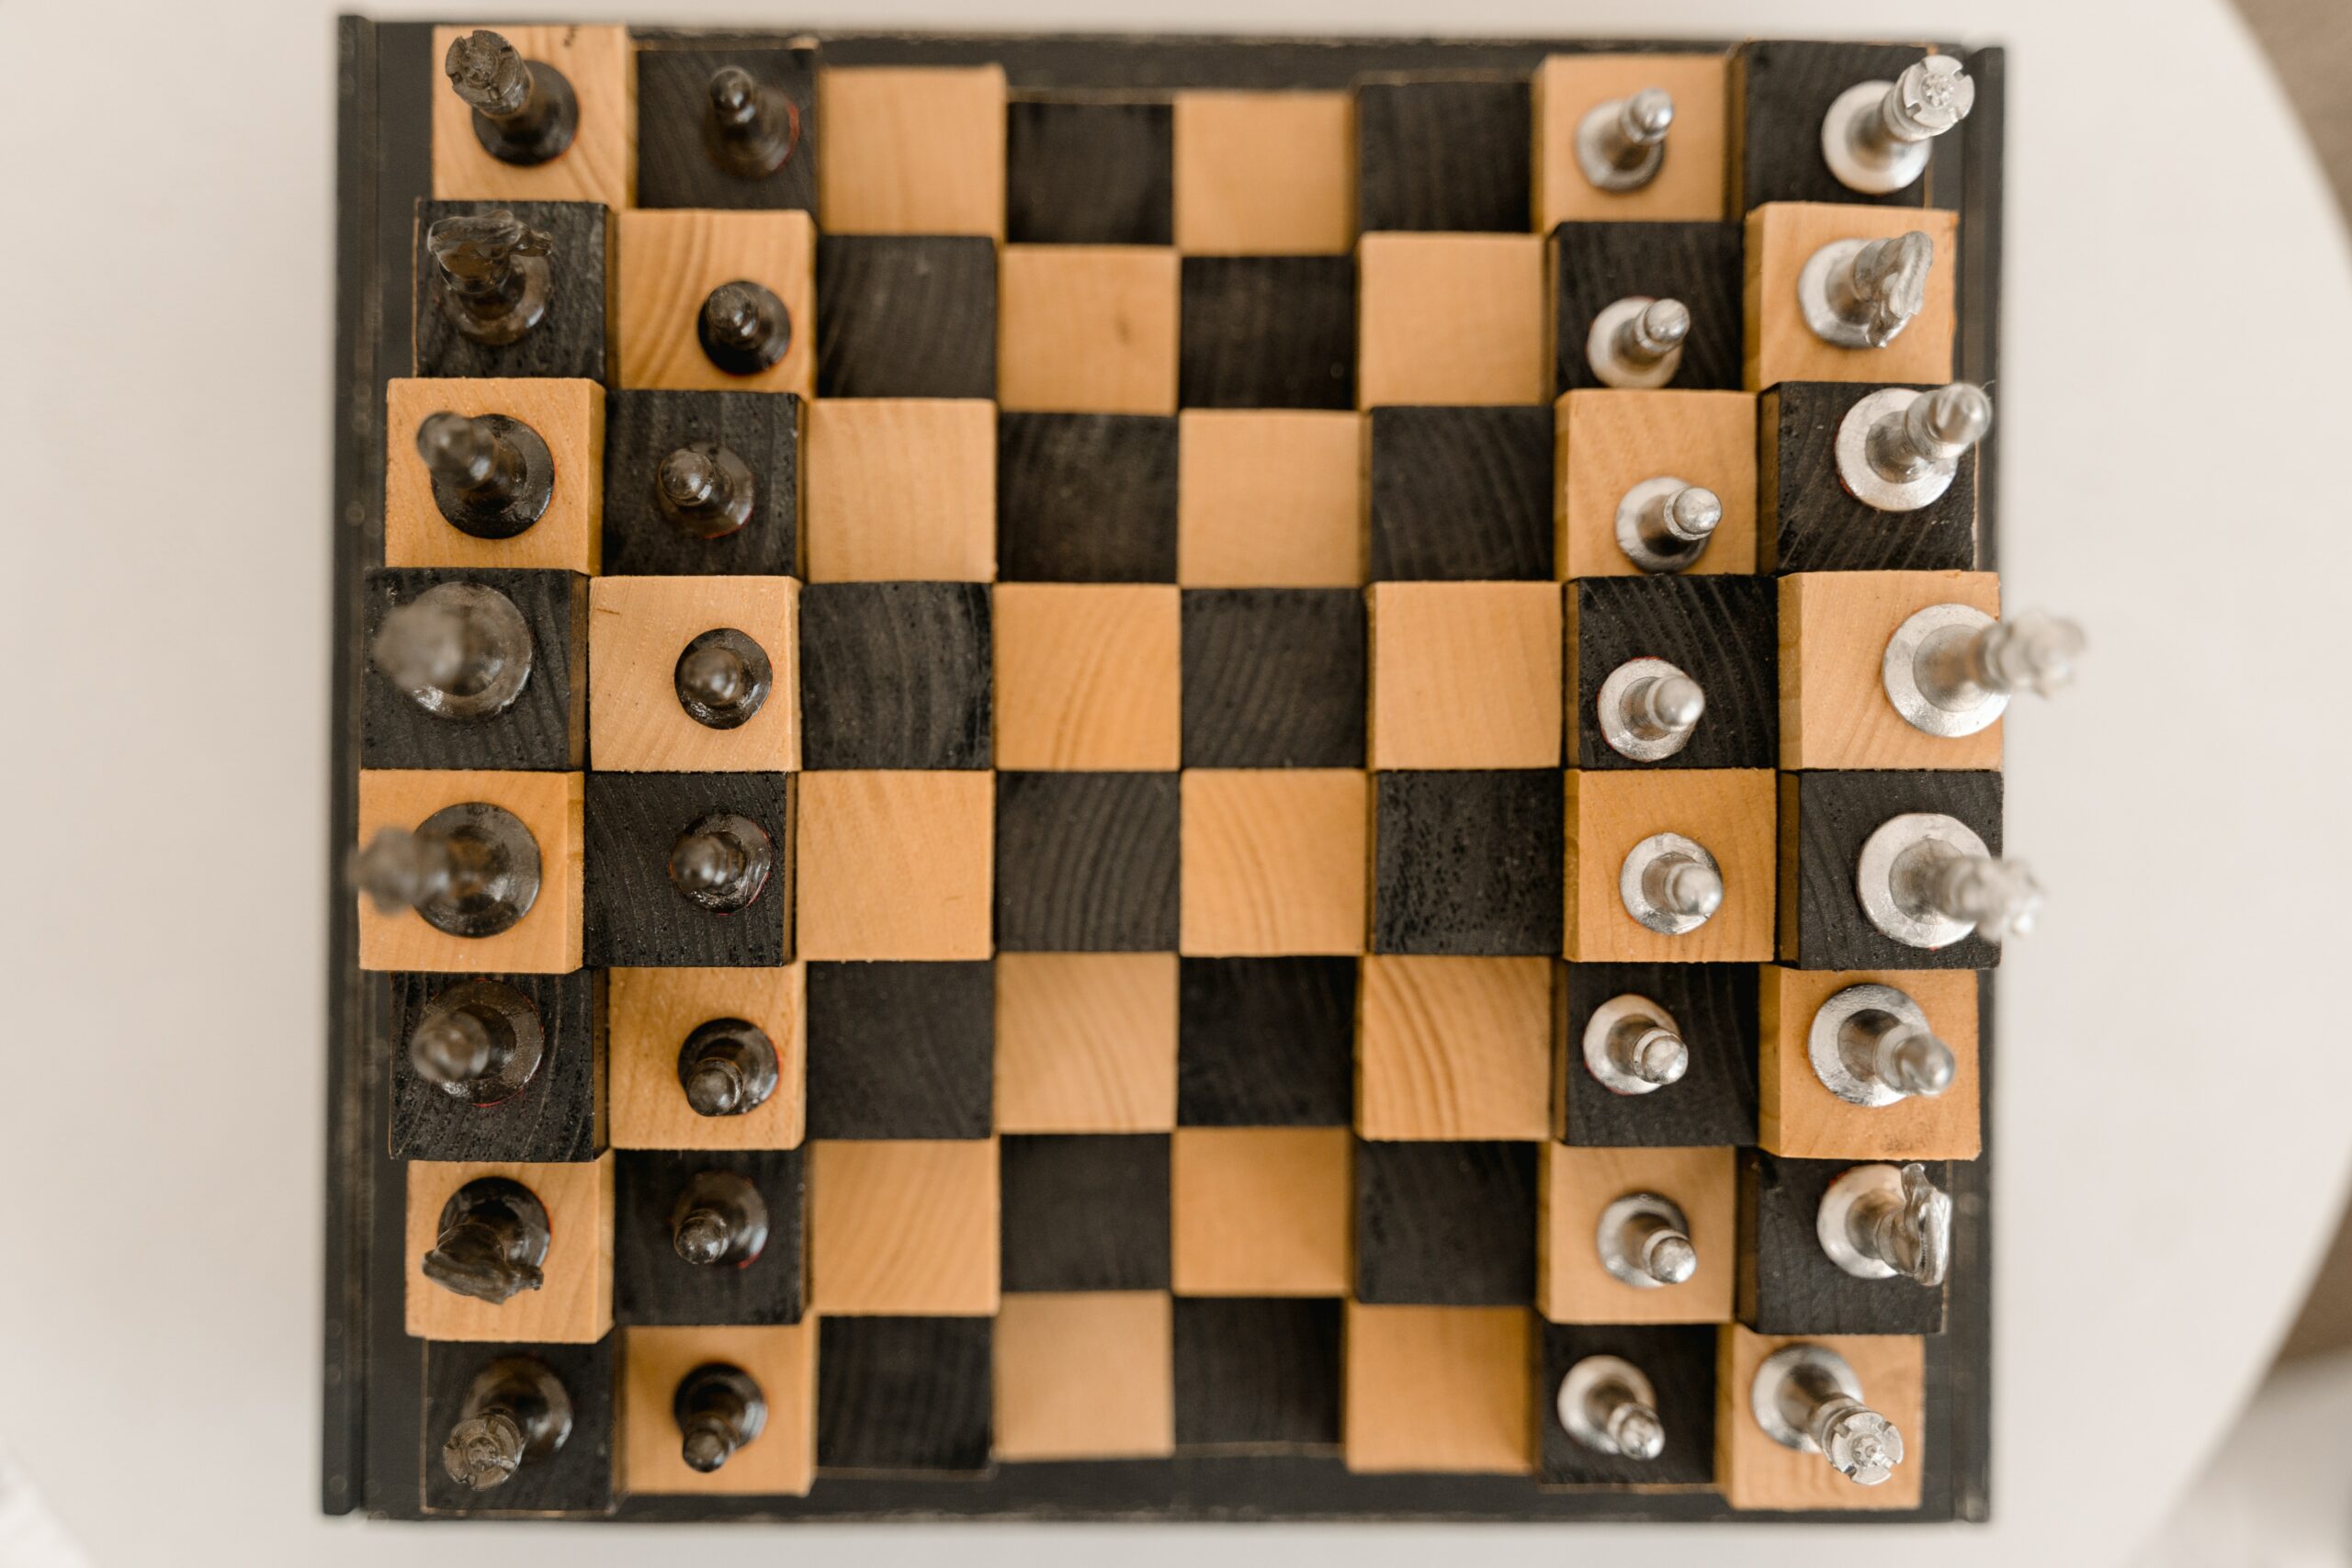 Chessboard with pieces arranged